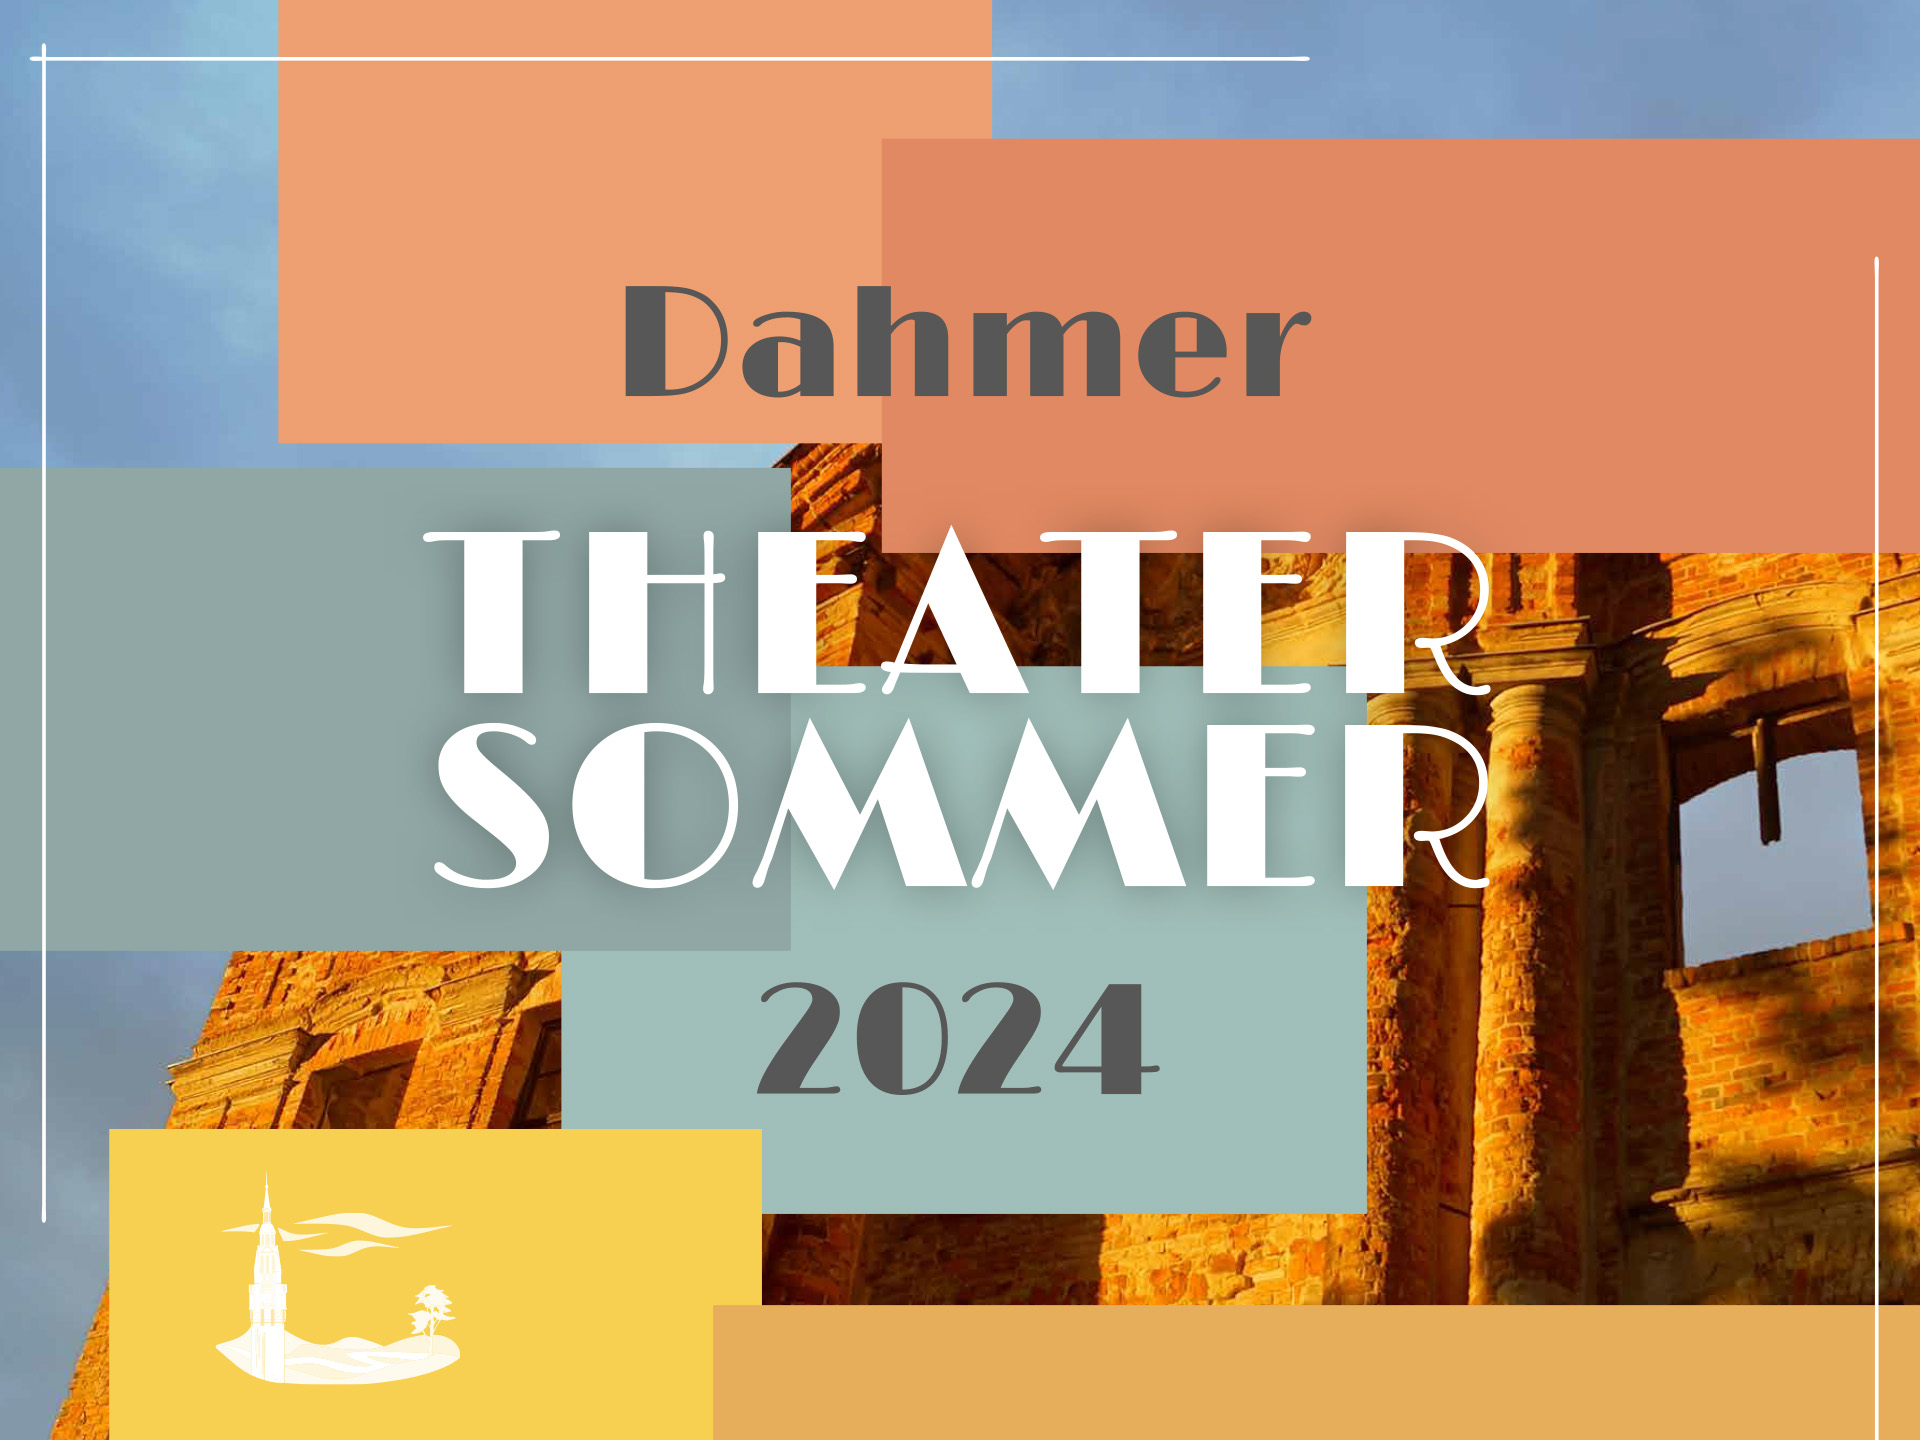 Dahmer Theatersommer 2024